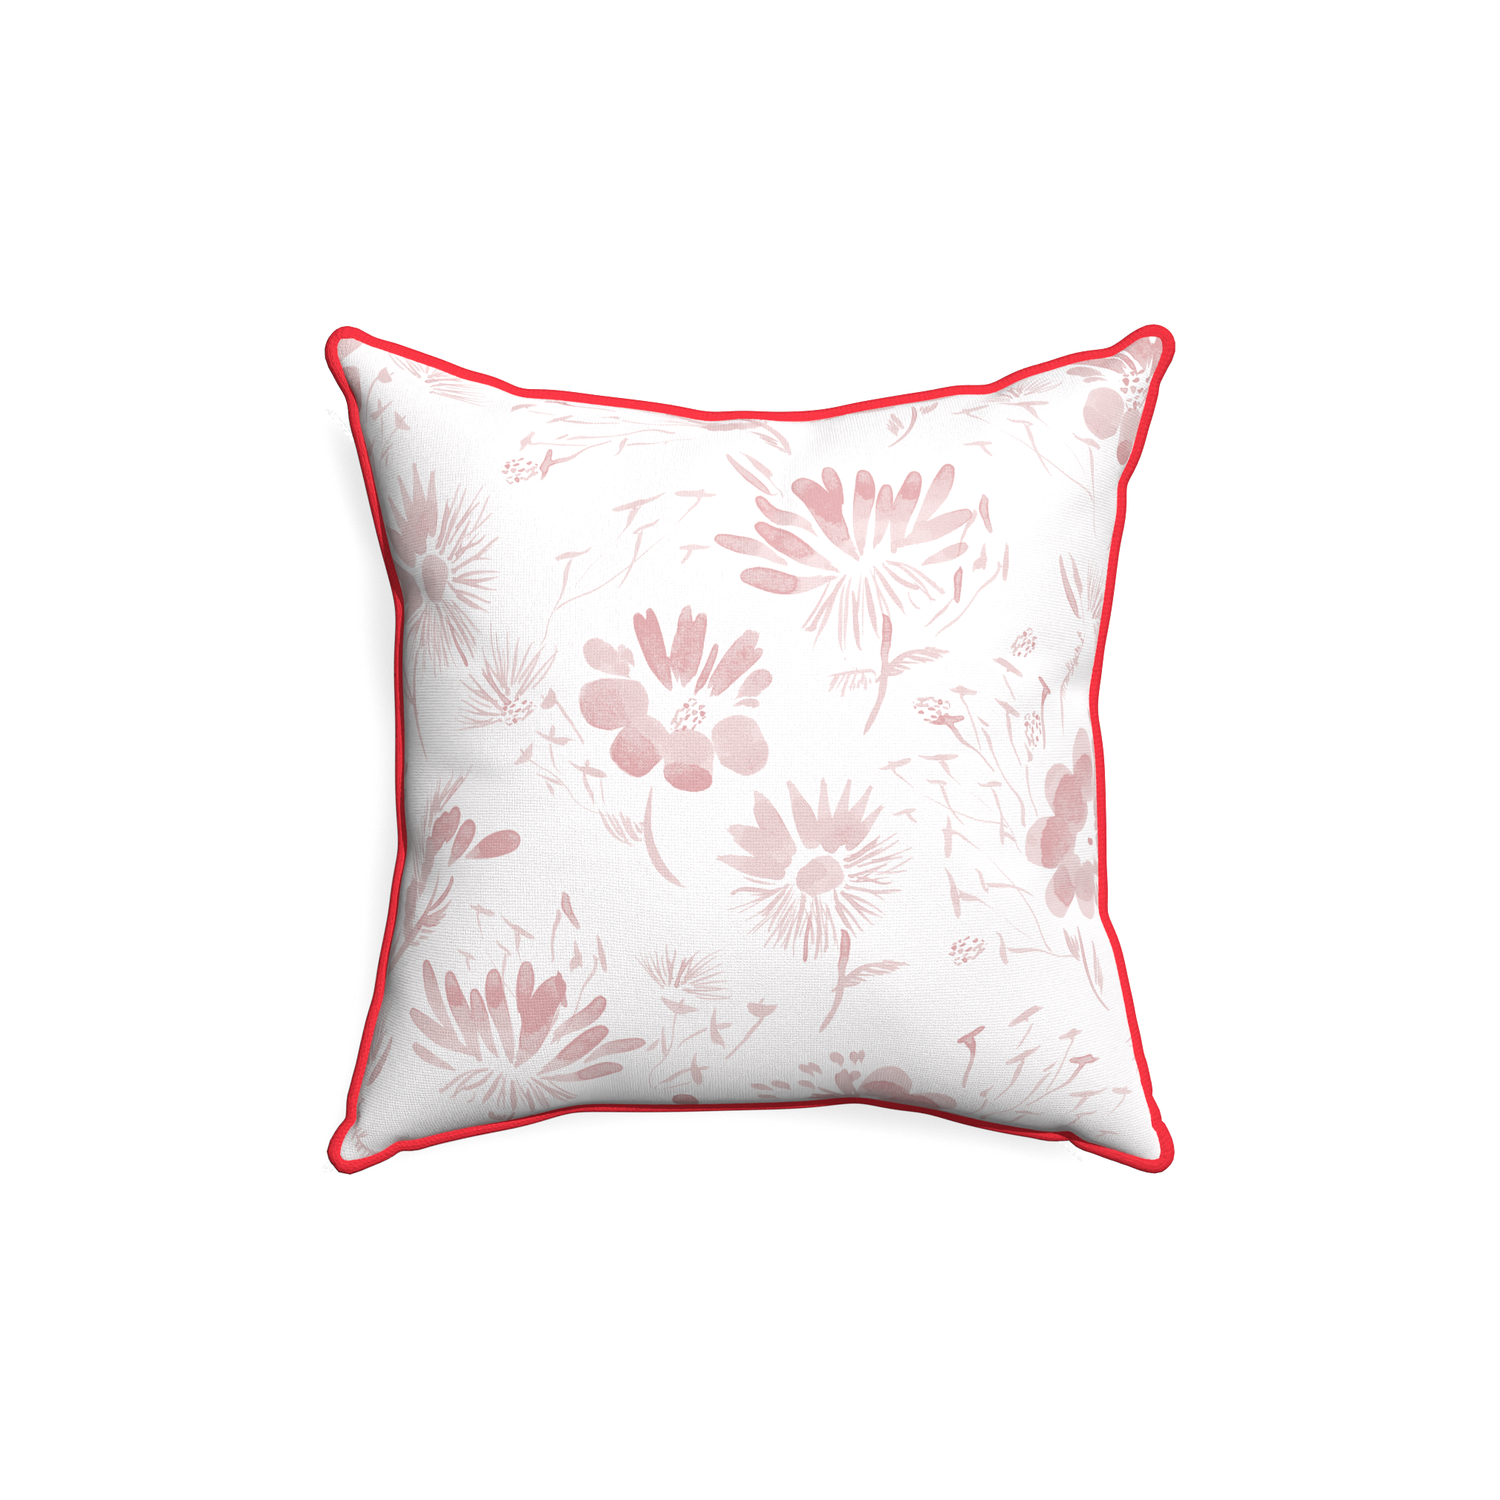 18-square blake custom pillow with cherry piping on white background